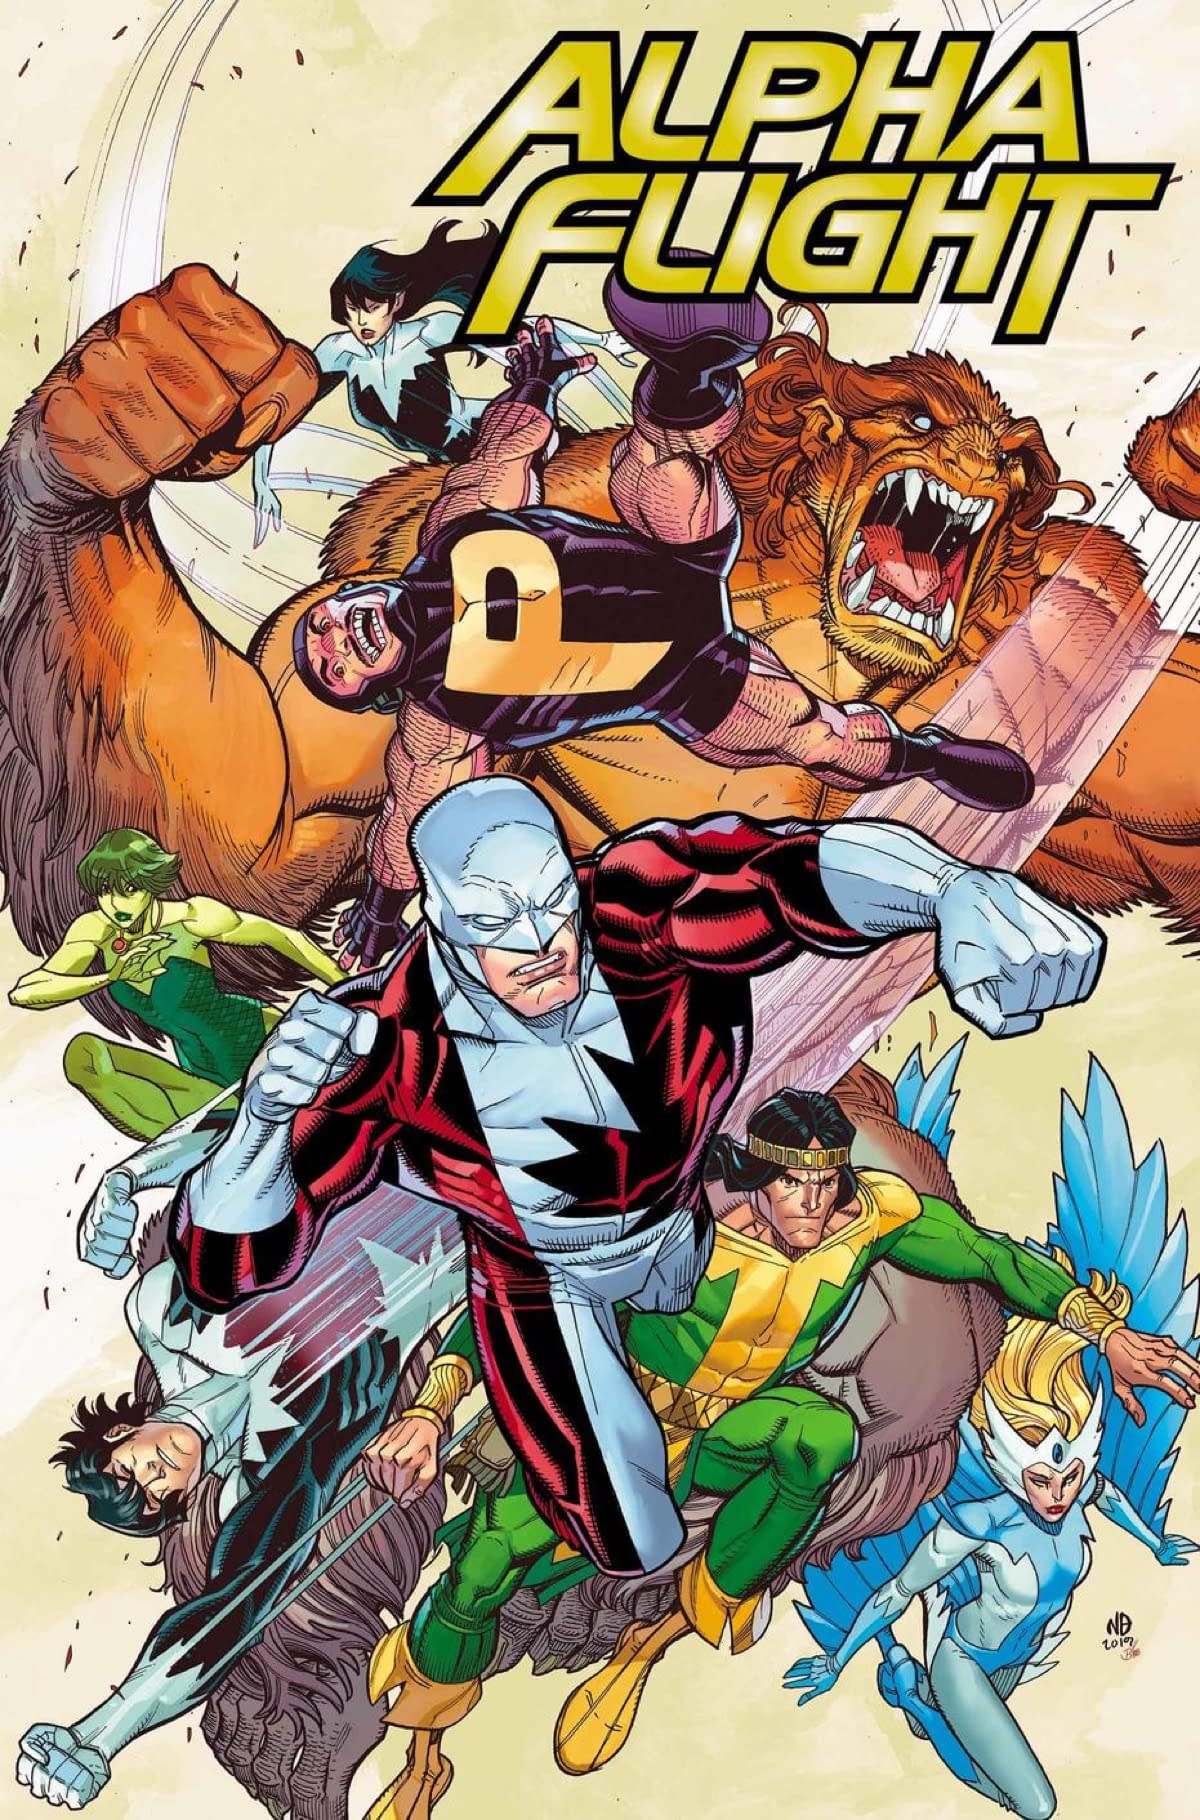 Blame Canada For This 7-Page Preview of Alpha Flight: True North